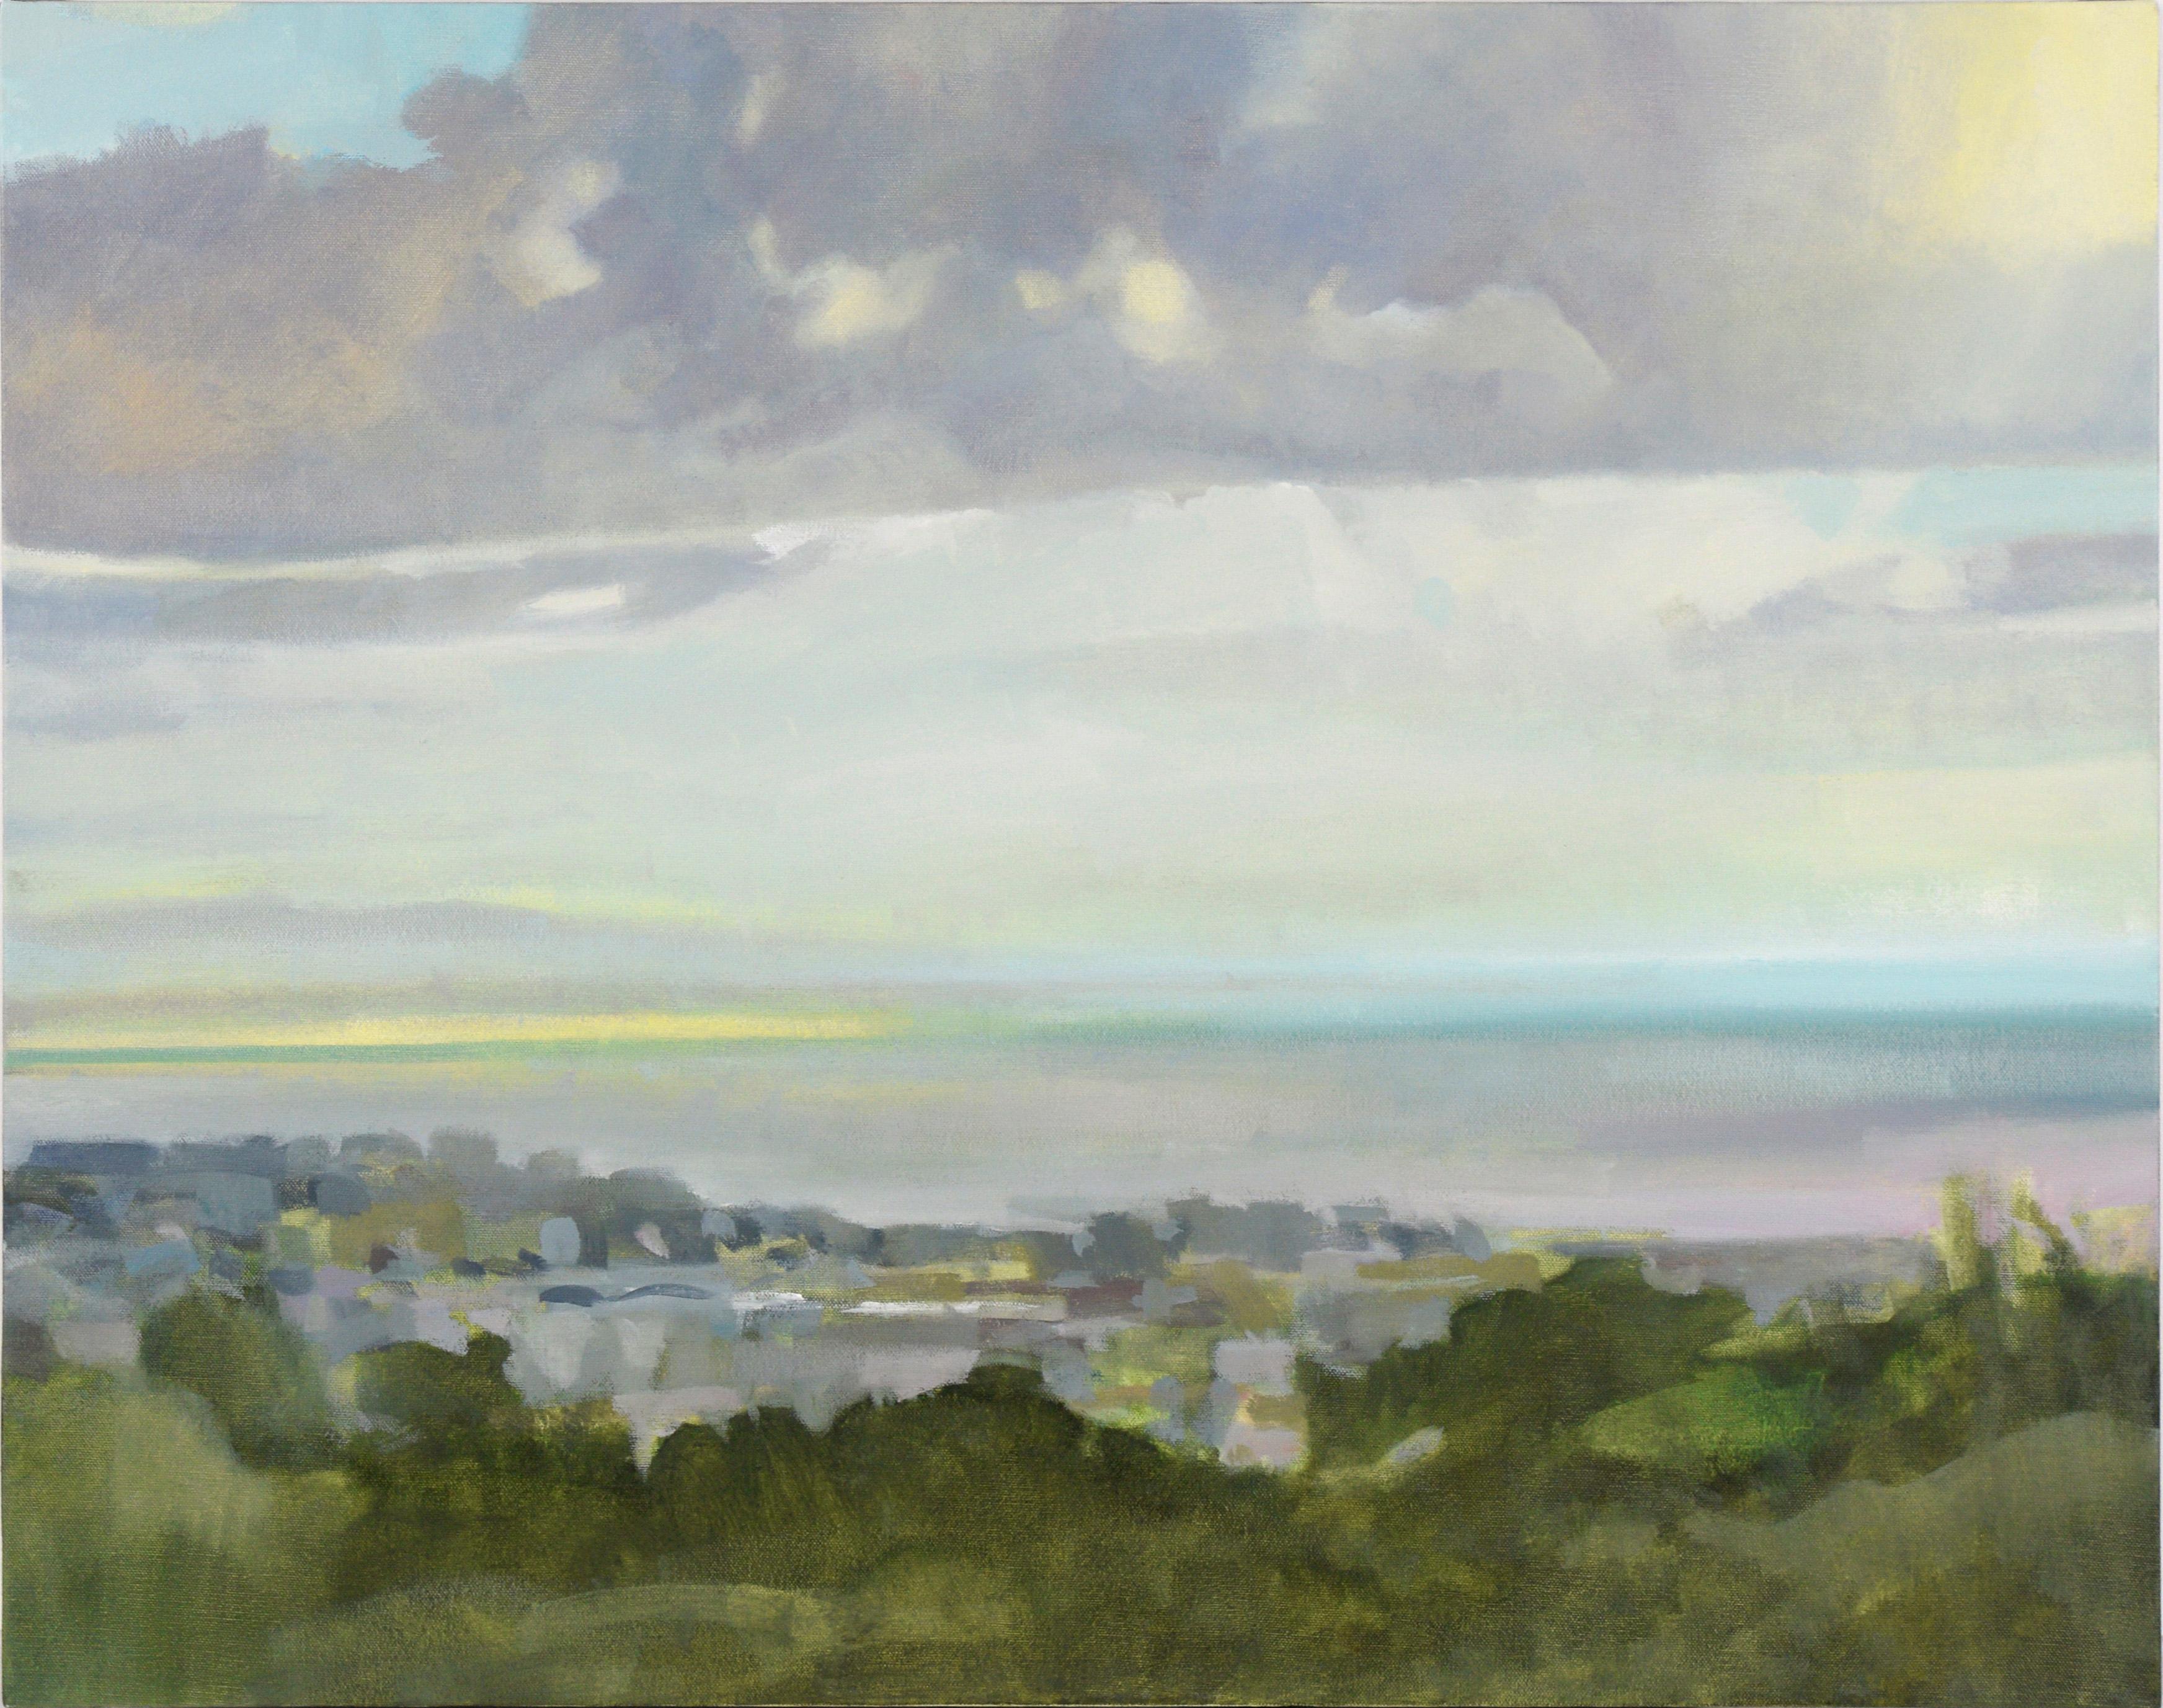 Brian Rounds Landscape Painting - Overlooking Santa Cruz and Monterey Bay - Plein Air Landscape in Oil on Canvas